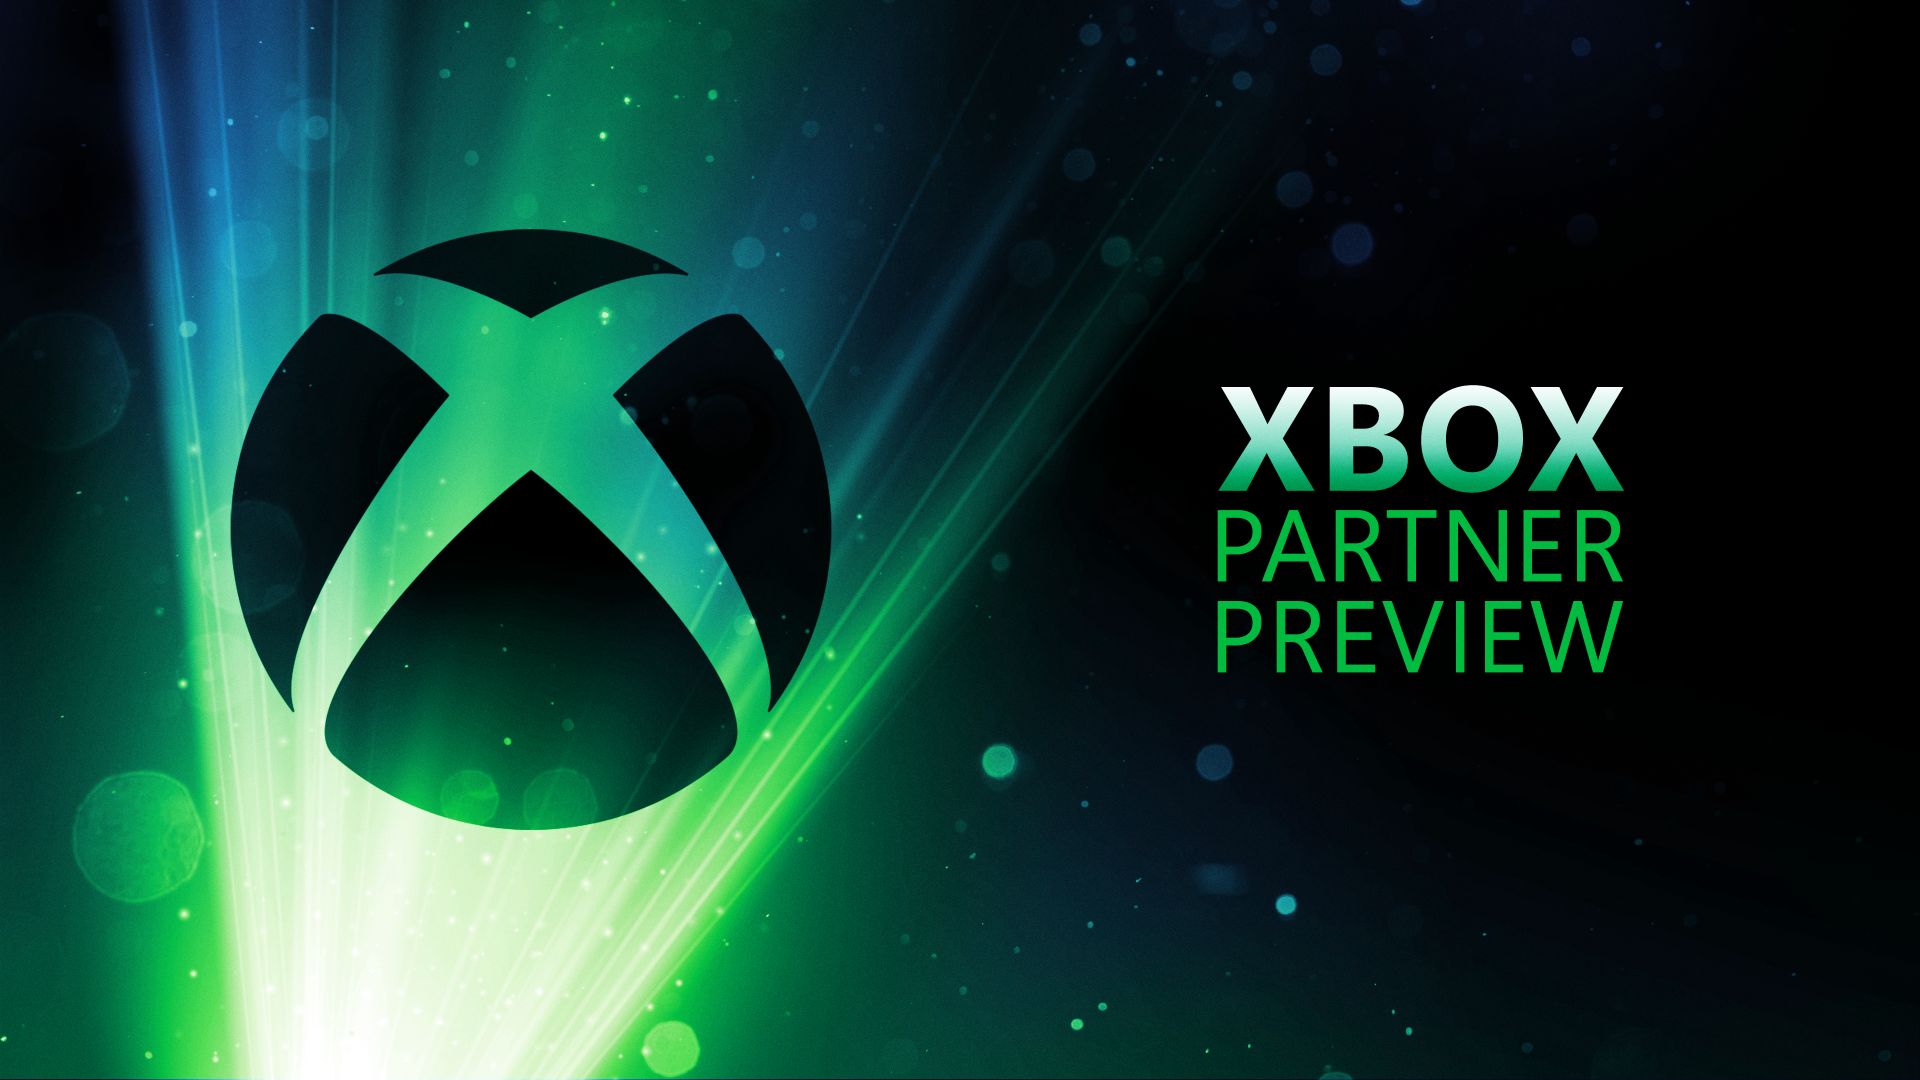 Key art for the Xbox partner preview